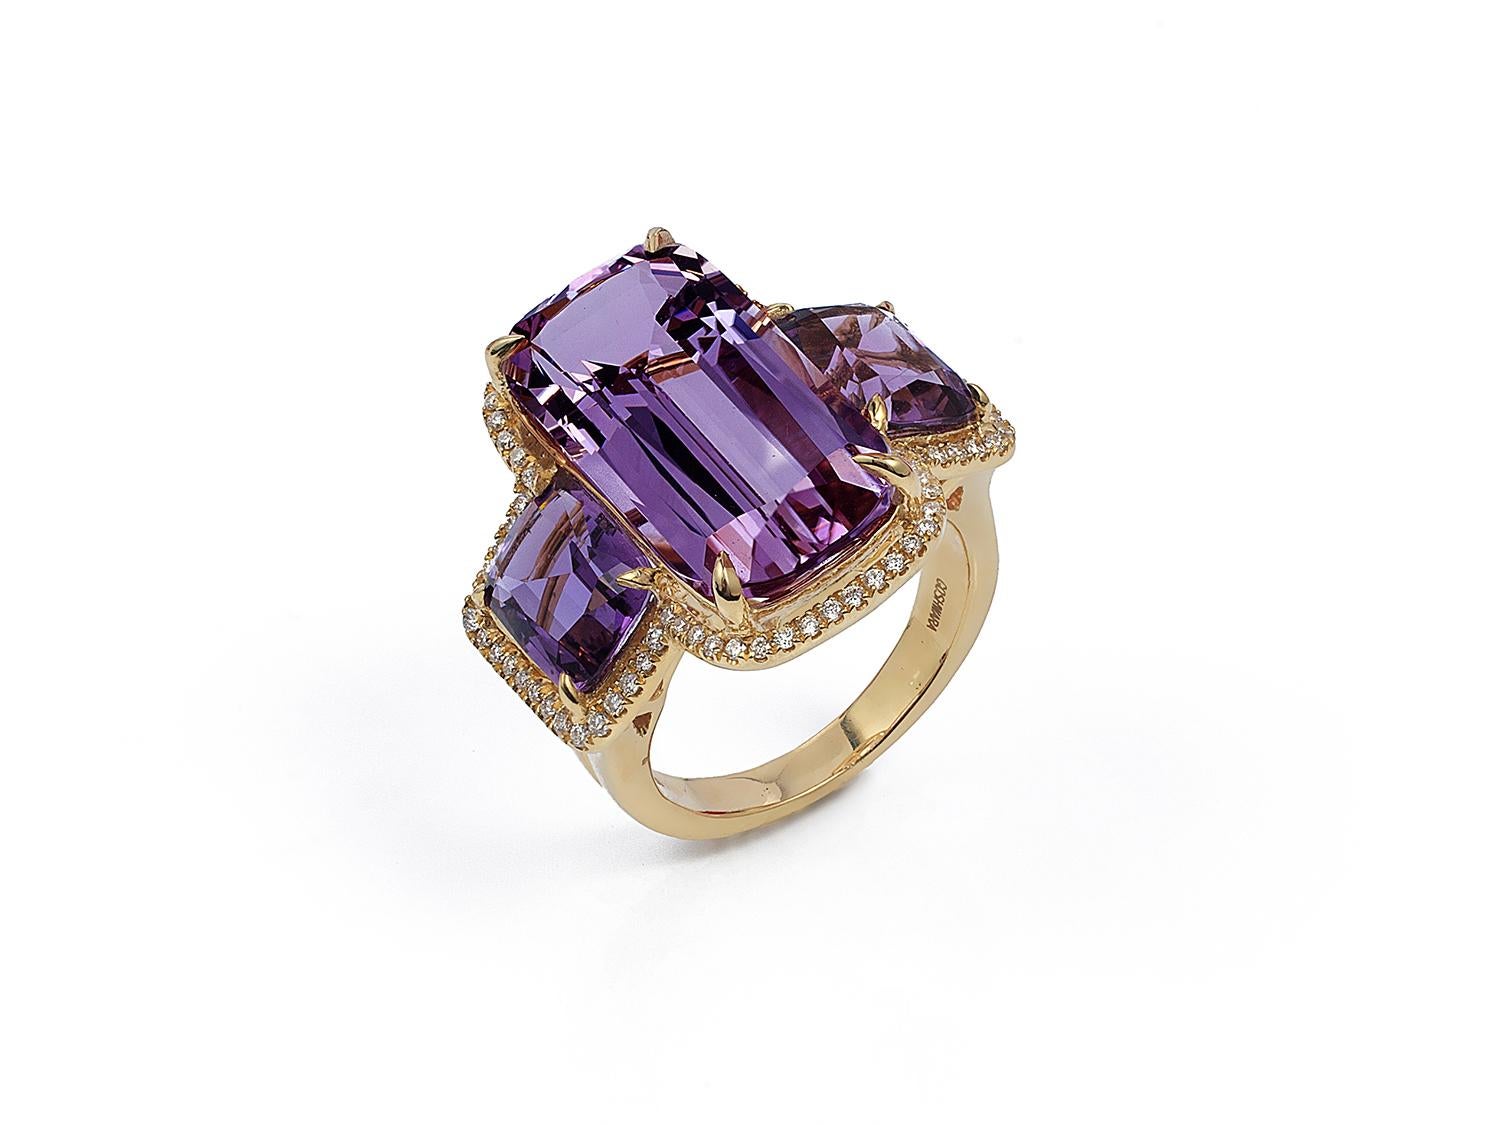 Amethyst Cushion Ring in 18K Yellow Gold with Diamonds, from 'Gossip' Collection. Please allow 2-4 weeks for this item to be delivered.

Stone Size: 21 x 10.5 mm & 9 x 7 mm 

Diamonds: G-H / VS, Approx Wt: 0.33 Cts
